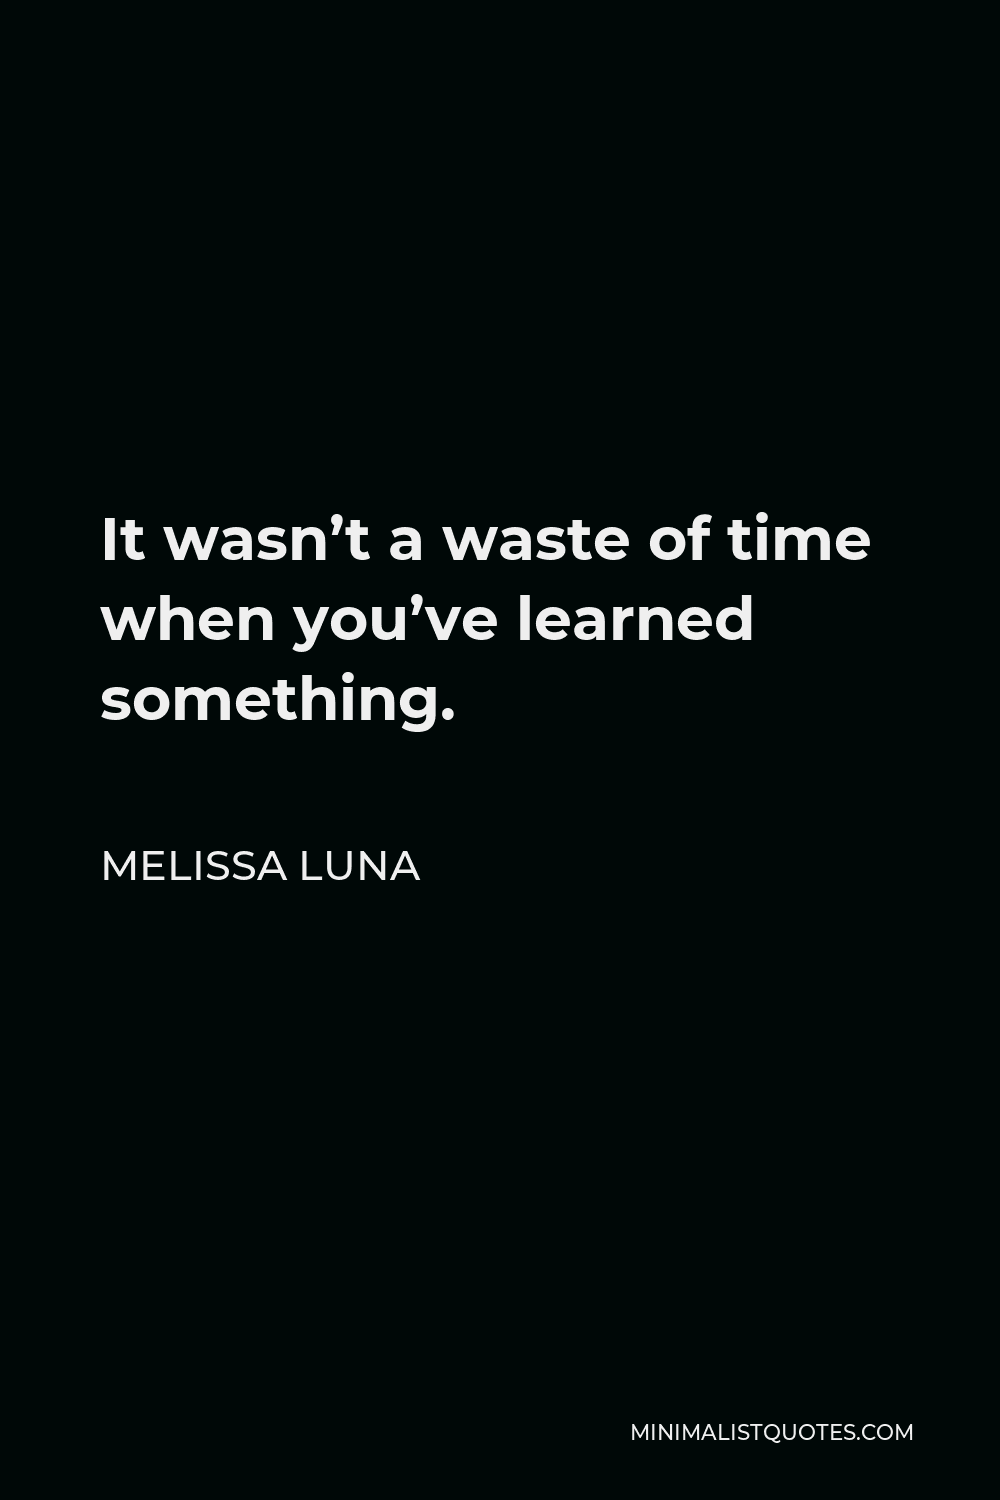 Melissa Luna Quote - It wasn’t a waste of time when you’ve learned something.